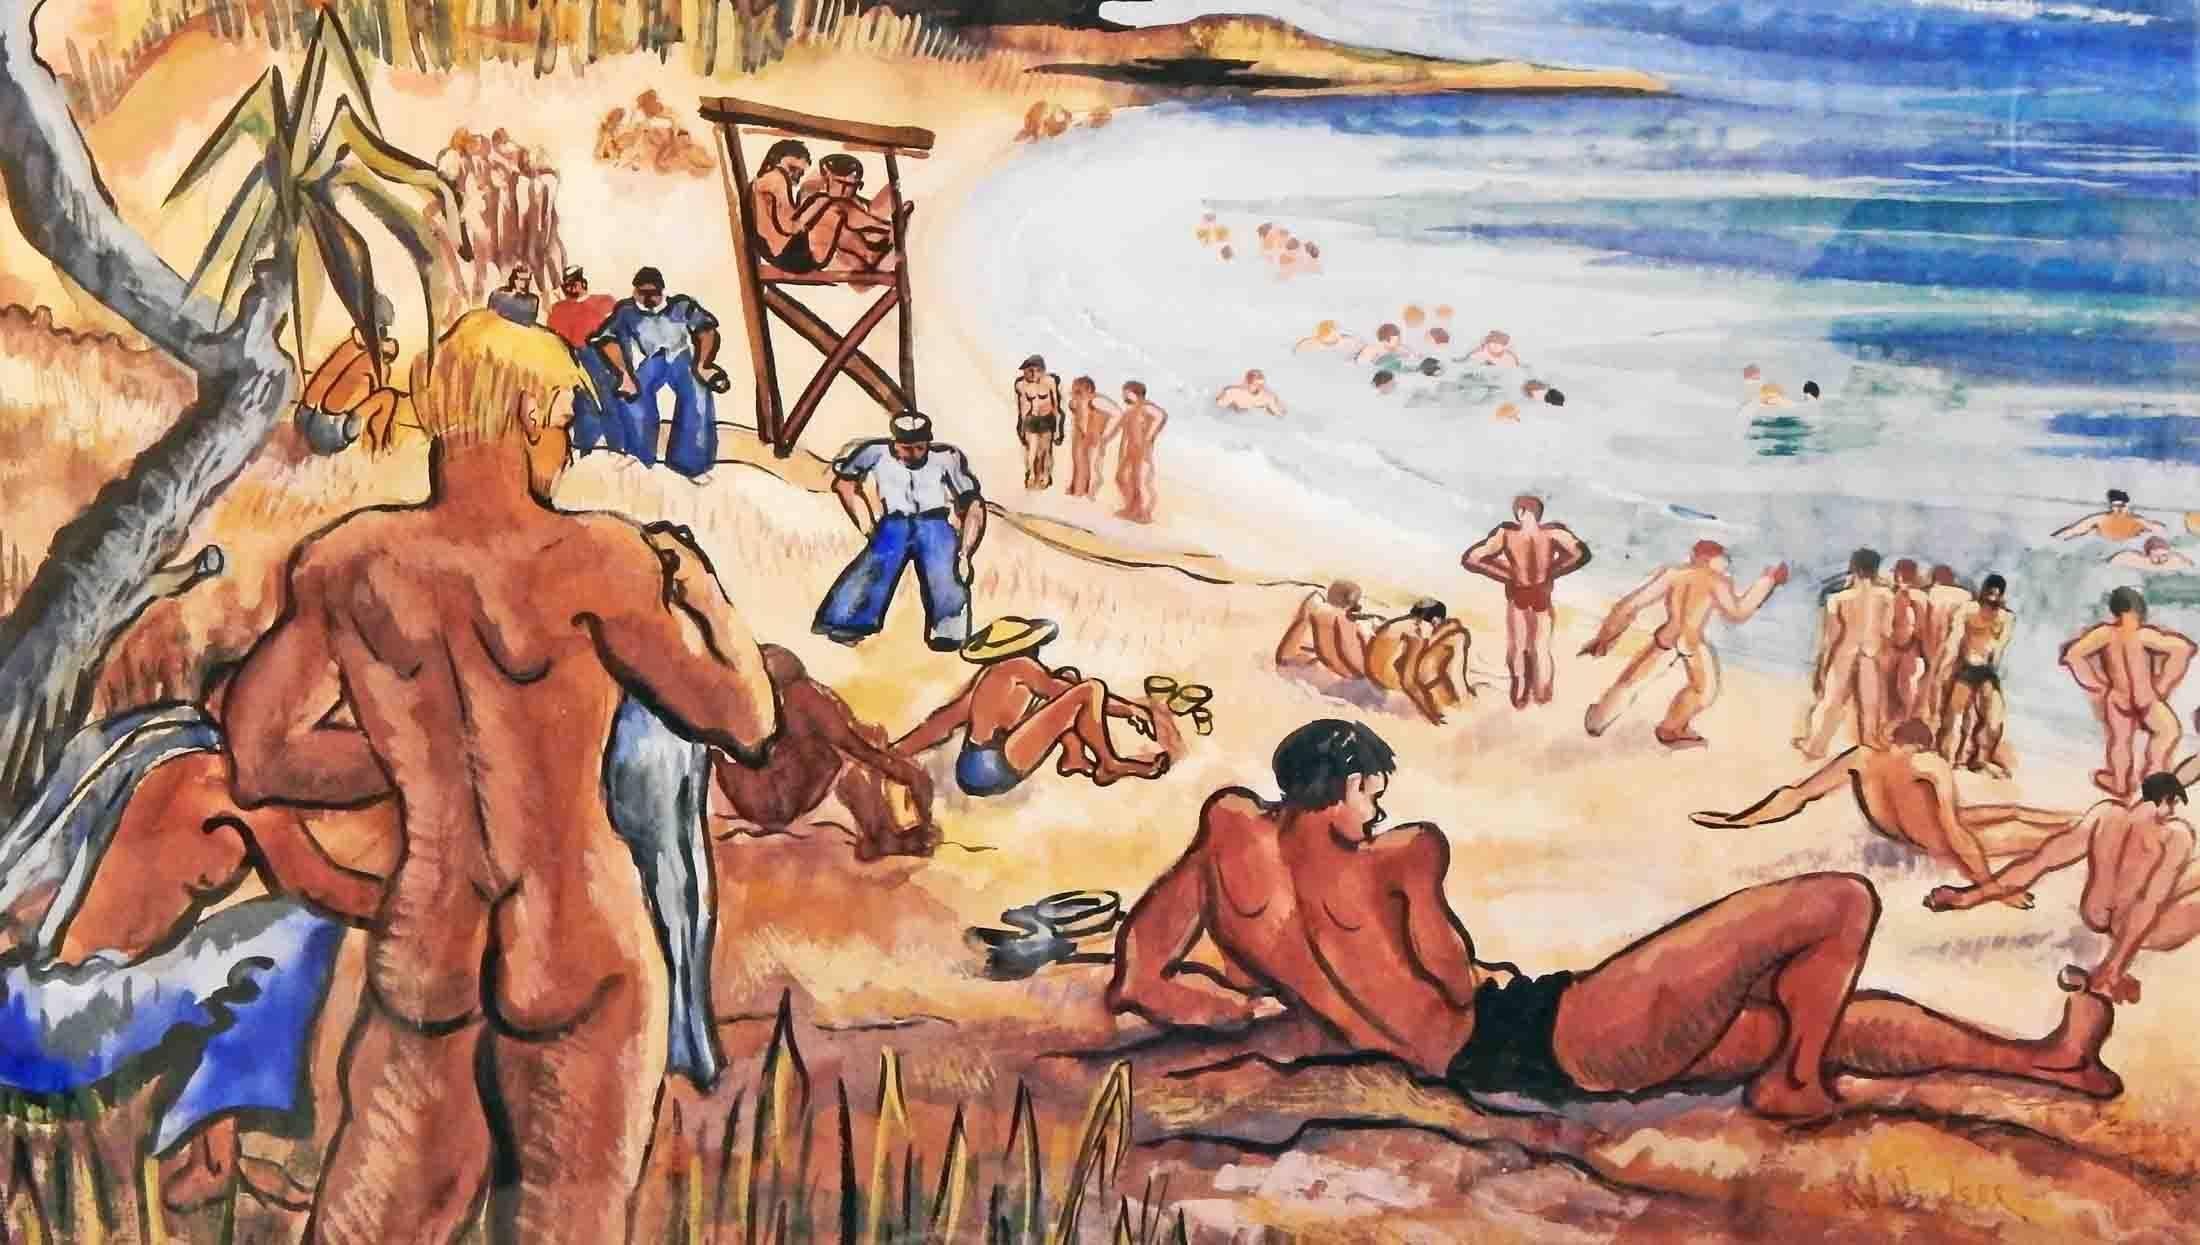 A vivid and colorful depiction of sailors enjoying a hard-earned afternoon on the beaches of Fiji, with their ships anchored off shore in the background, this painting is a rare and joyful view of American naval men at the end of World War II. Naked